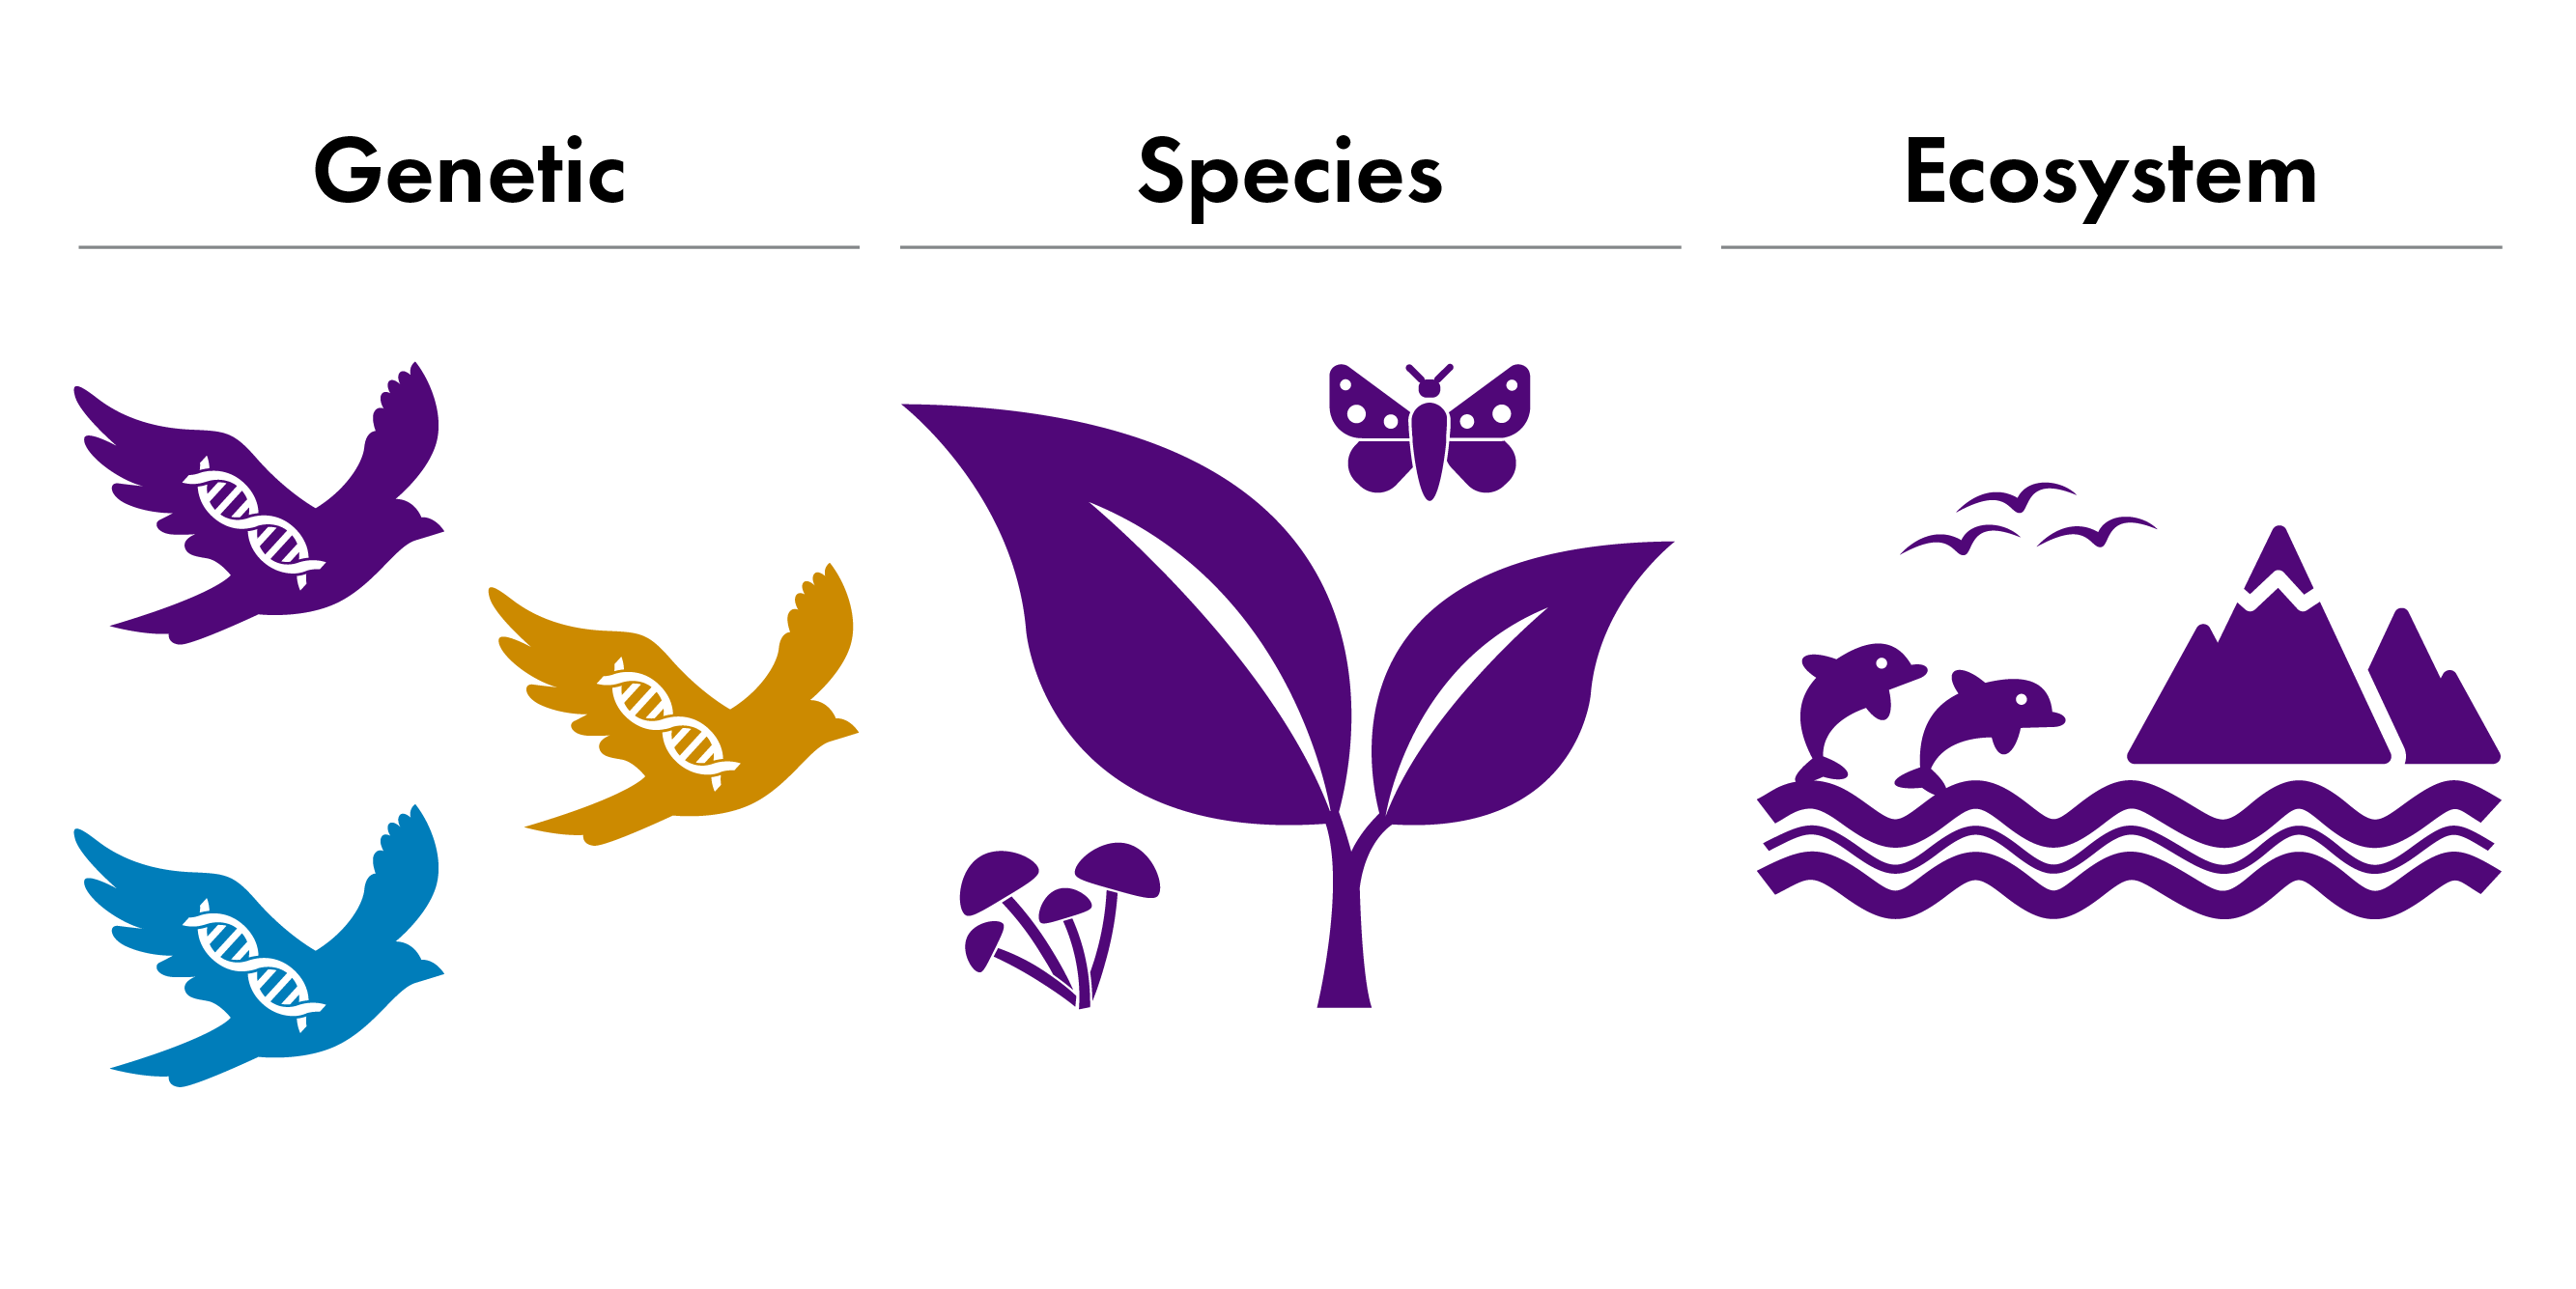 Image showing genetic diversity, diversity between species, and diversity of ecosystems. Together these three levels of variation are known as 'biodiversity'.